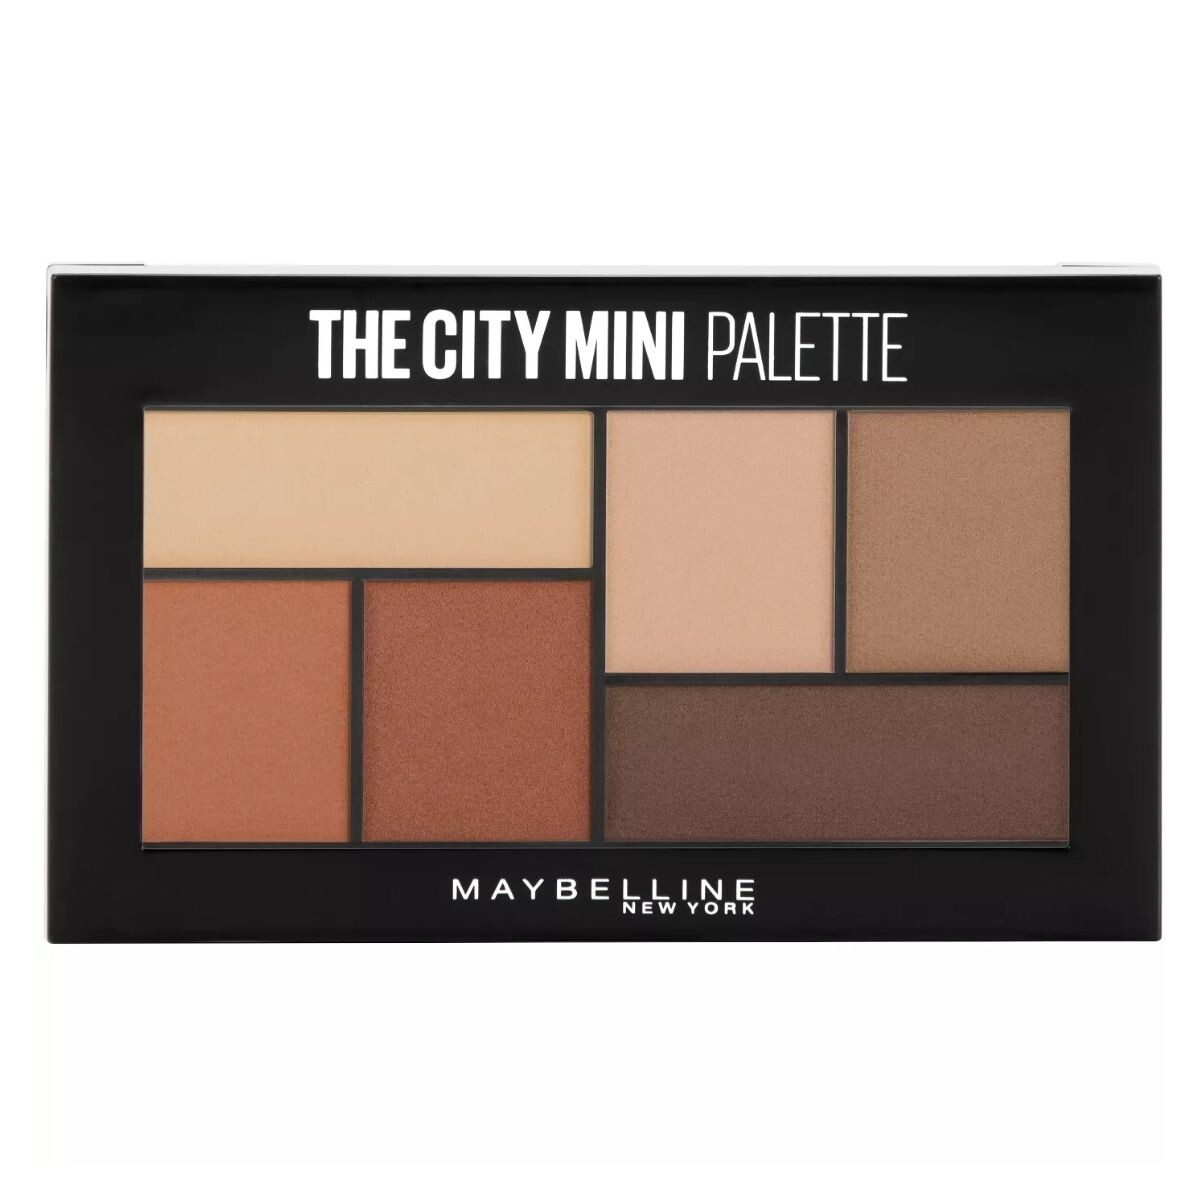 Sombra Maybelline The Citiy Mini Palette Brooklyn Nudes #500 